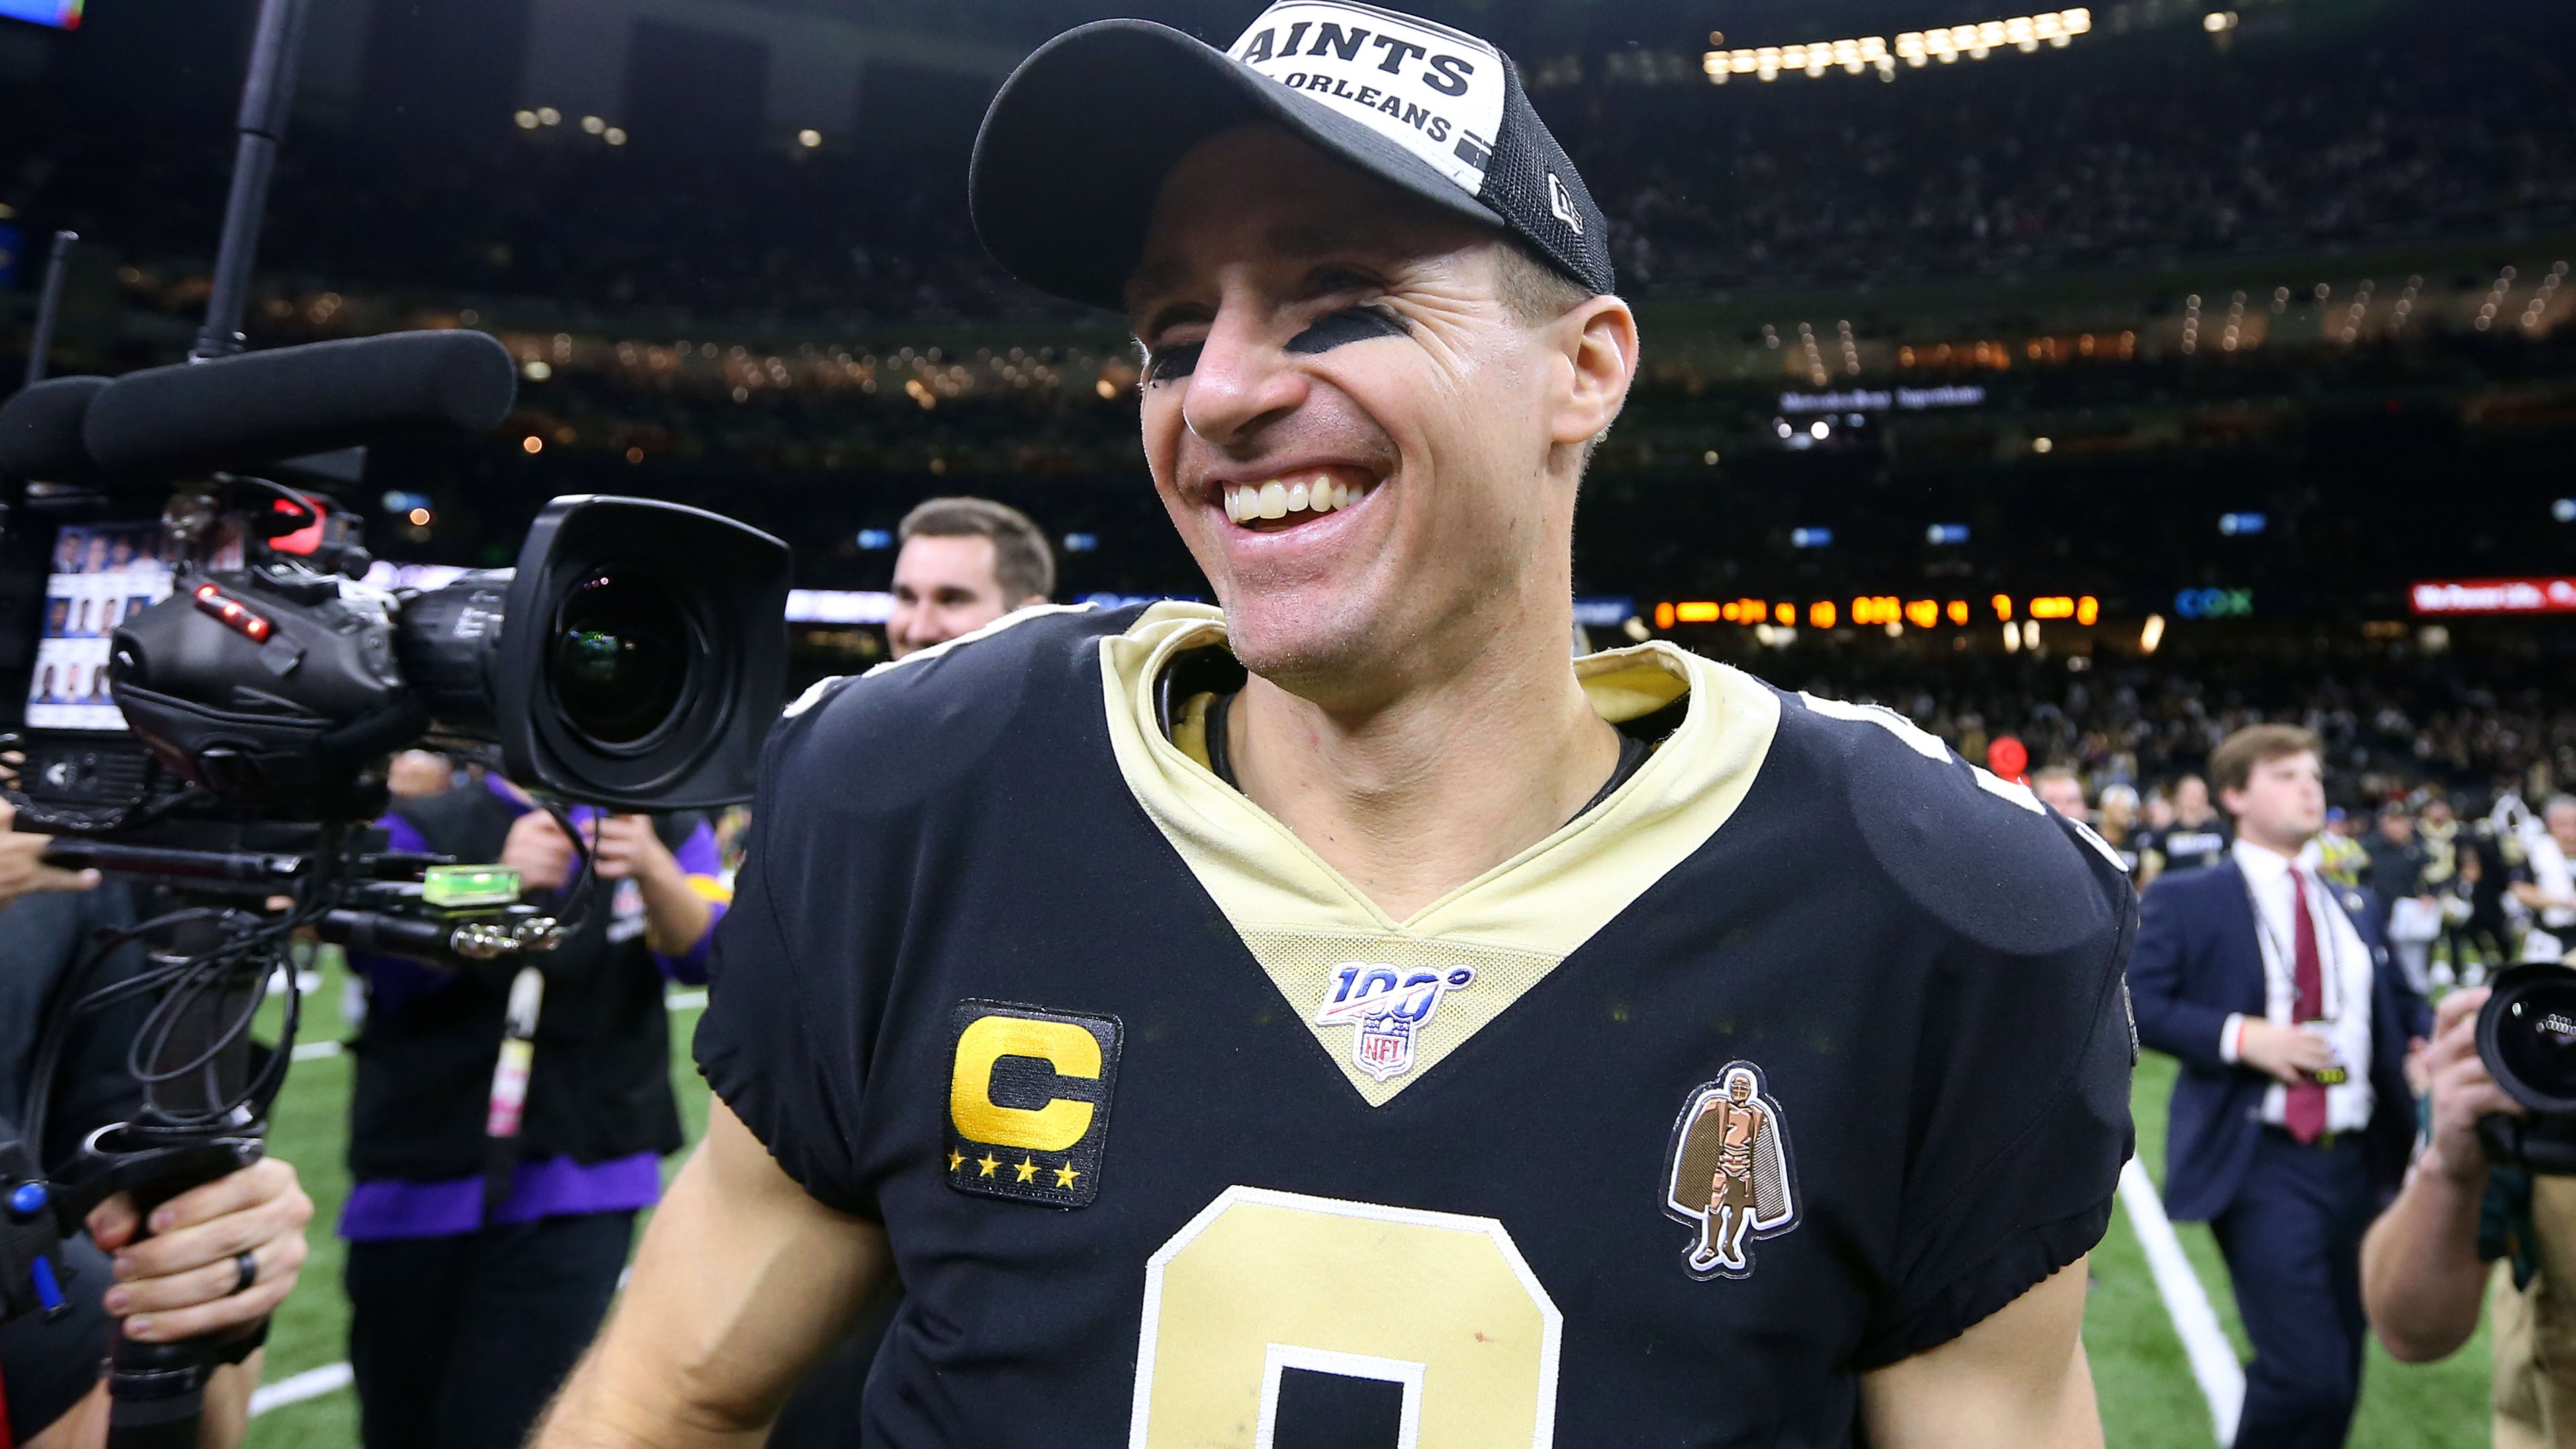 Drew Brees Career Stats, Earnings, Hall of Fame Chances, Super Bowl Record and Facts